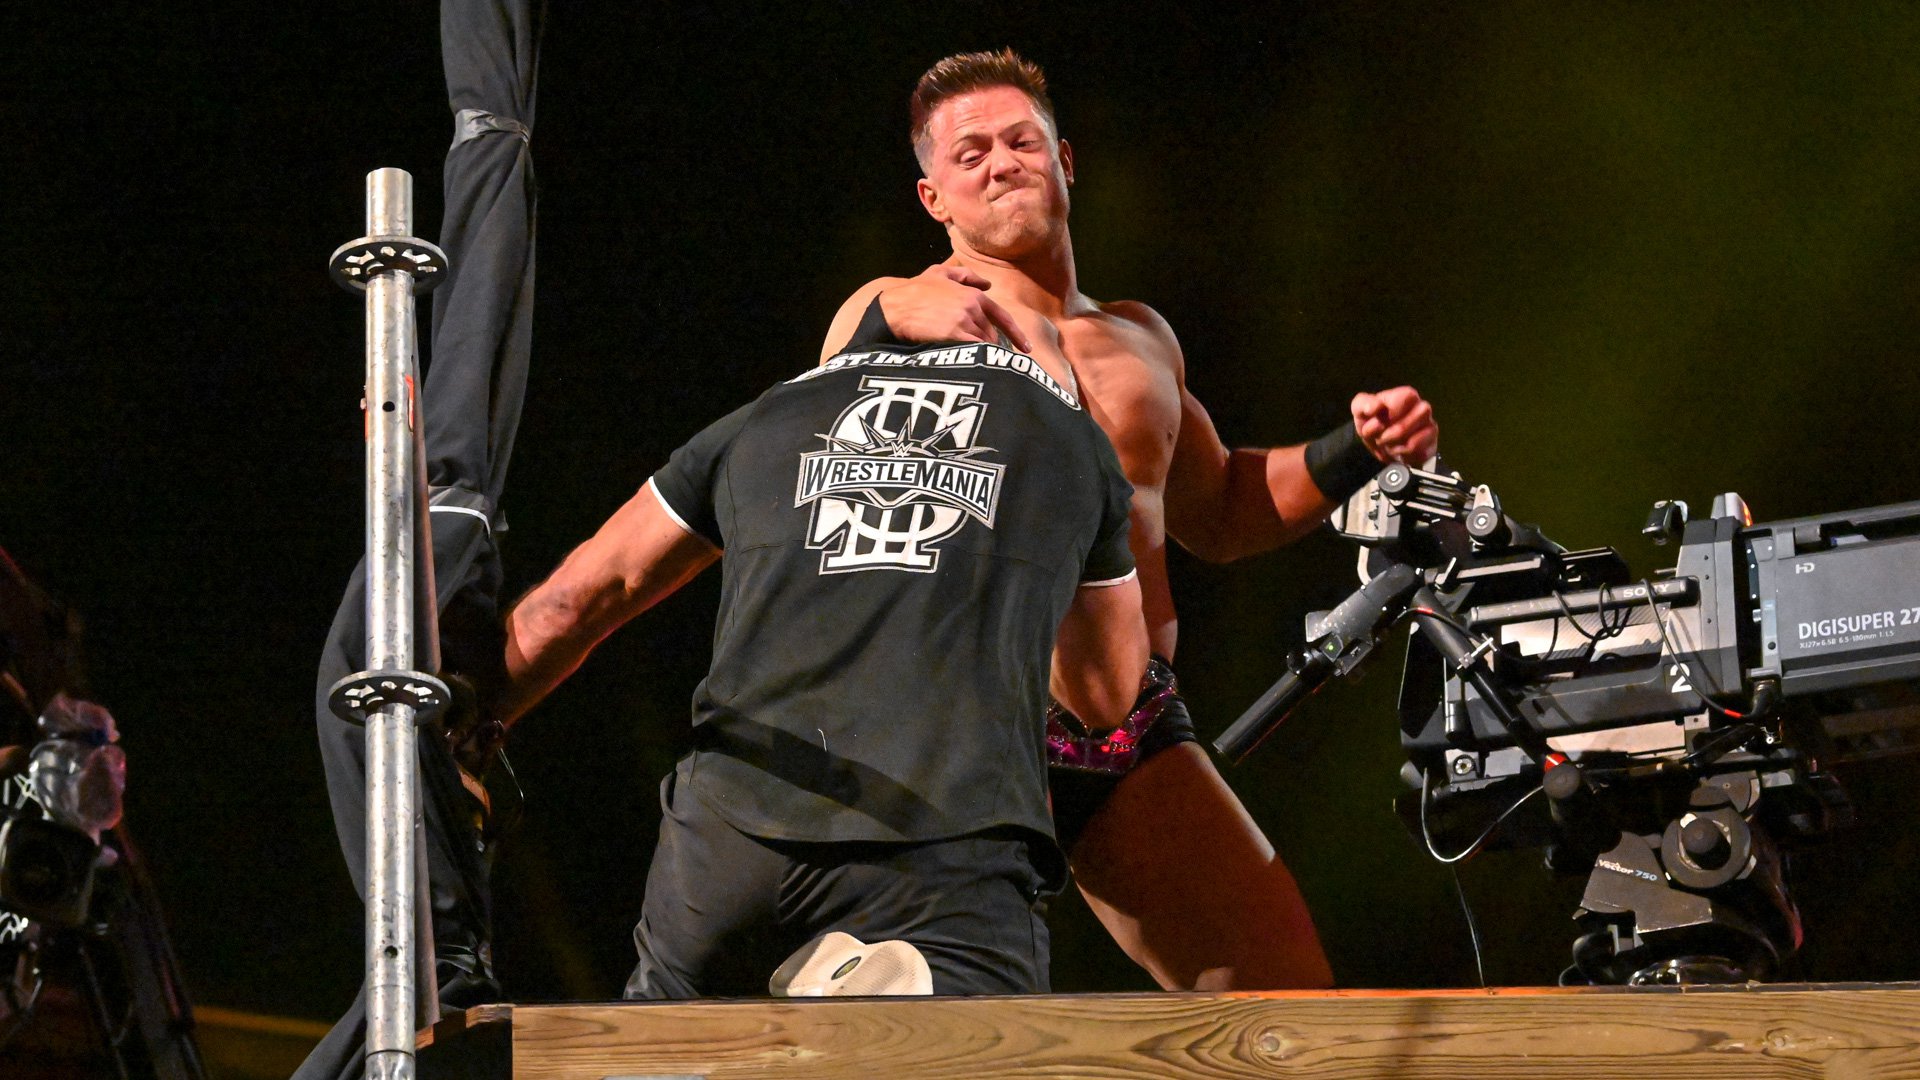 How will The Miz bounce back after crushing loss to Shane McMahon?